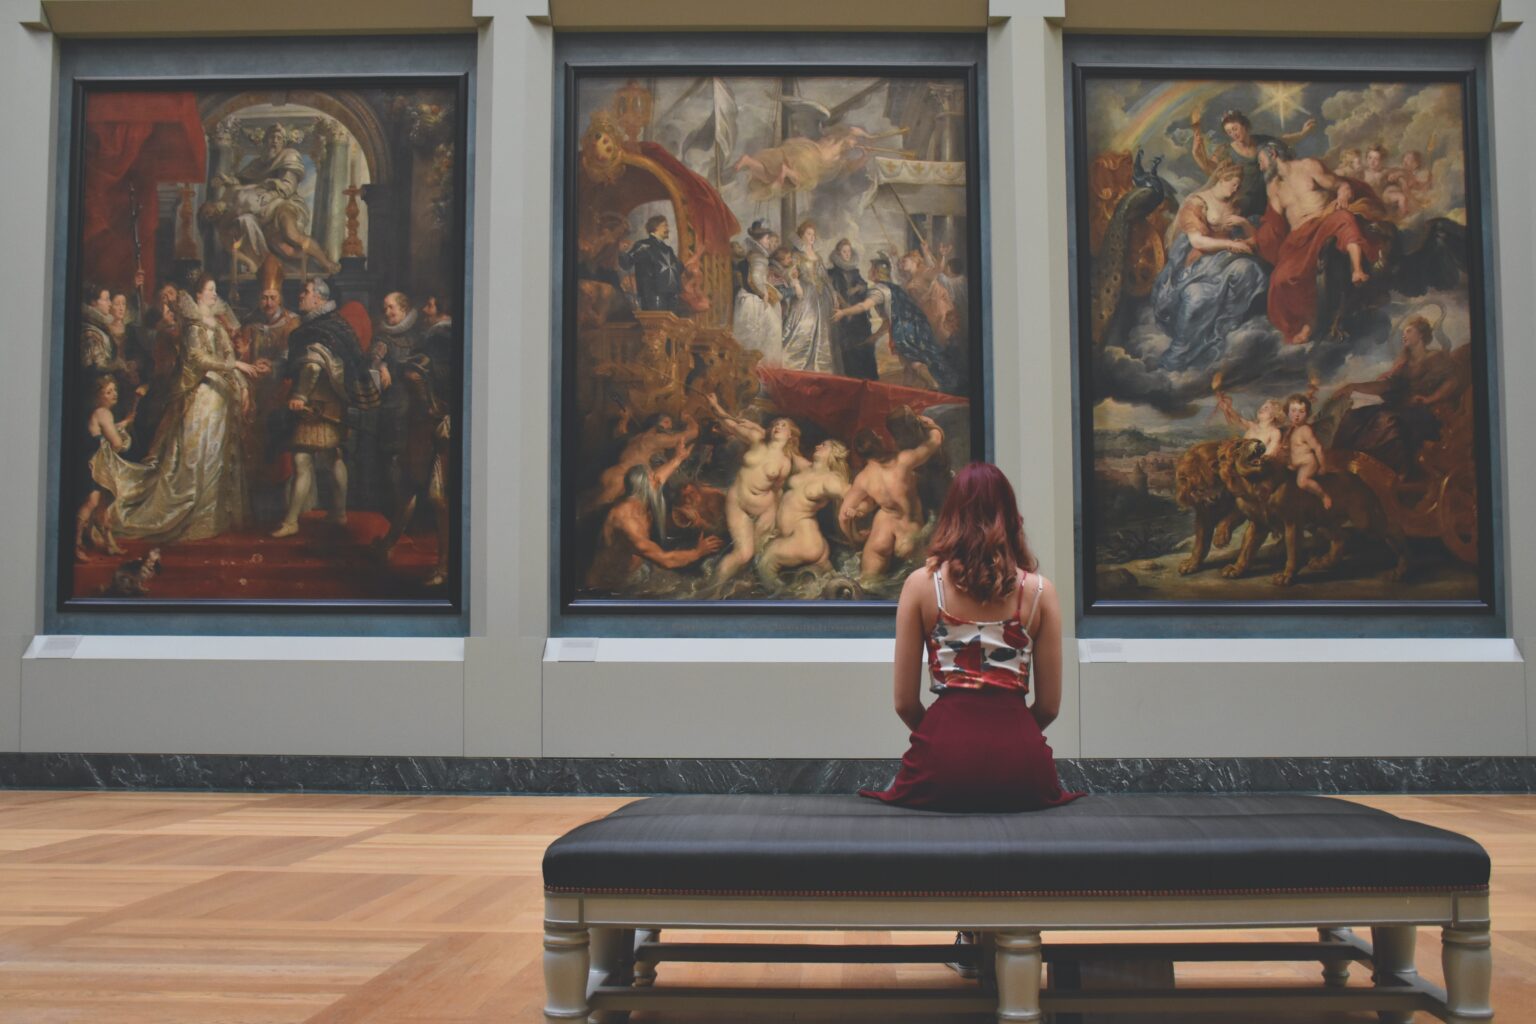 3 paintings in a gallery, a person sits in front of them